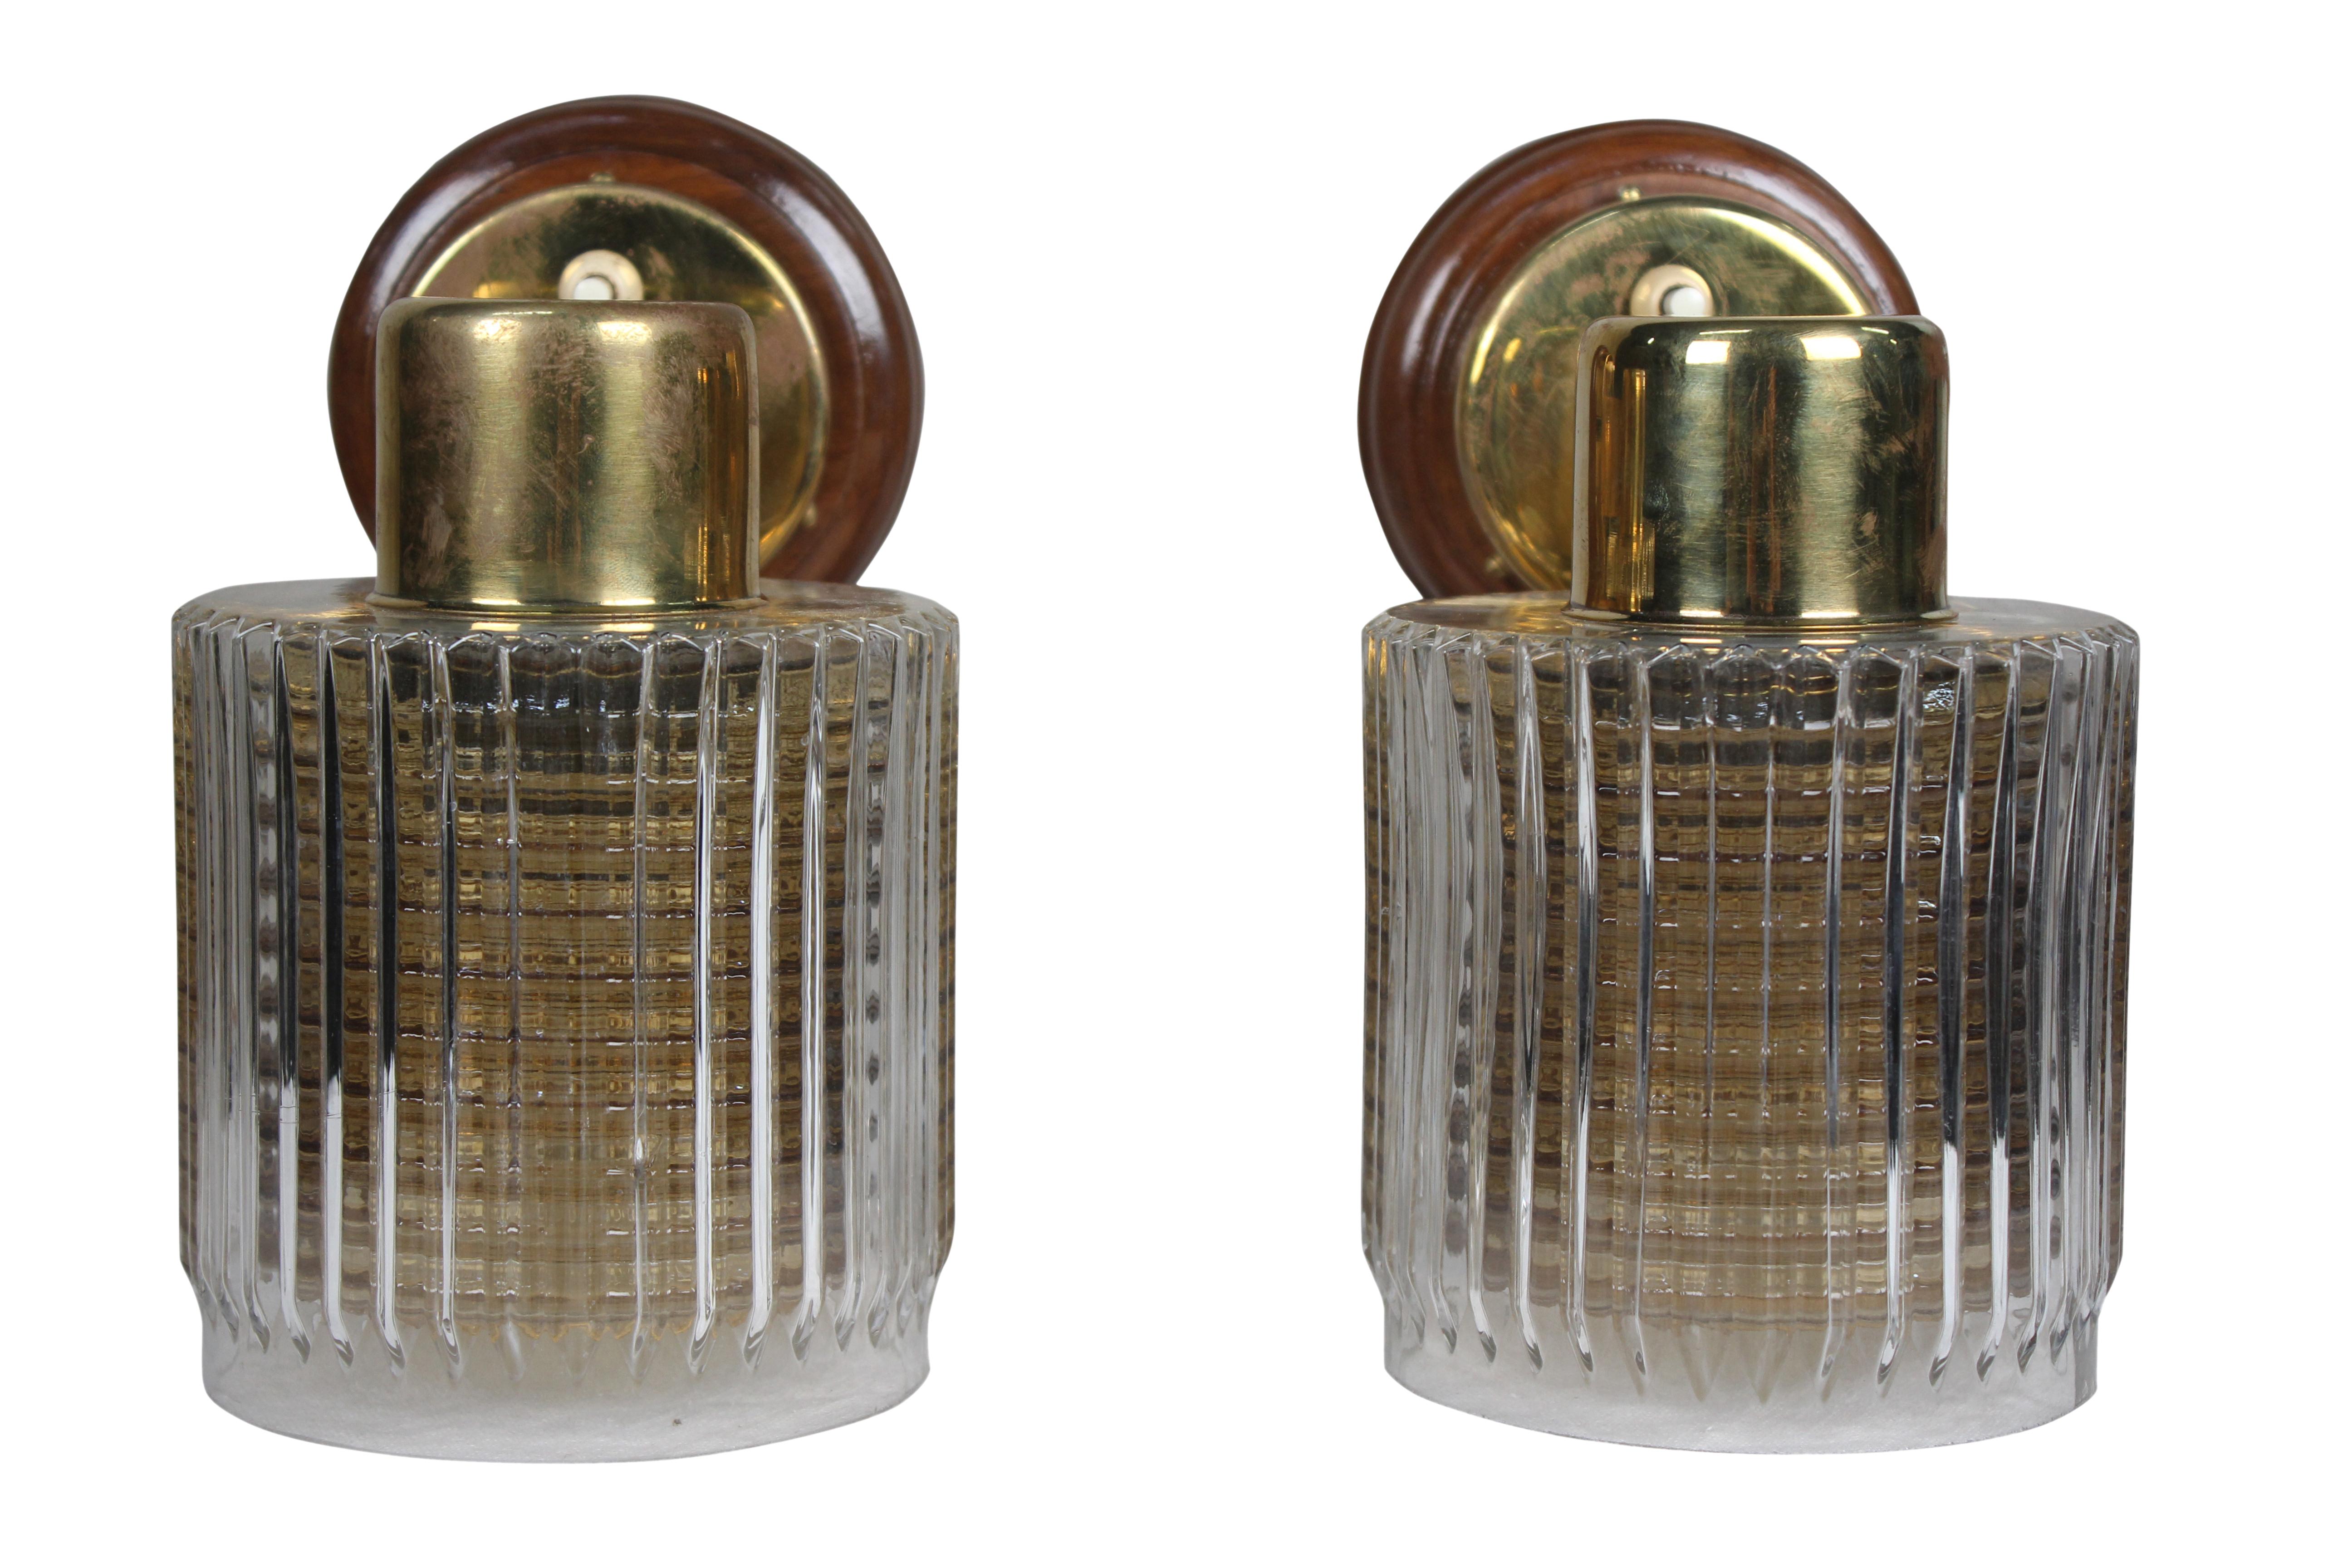 A pair of brass wall sconces with teak back plate with double glass shades. The interior shade is an amber color and the exterior shade is a textured clear glass, mid-20th century. Rewired for American use and takes a standard base light bulb.